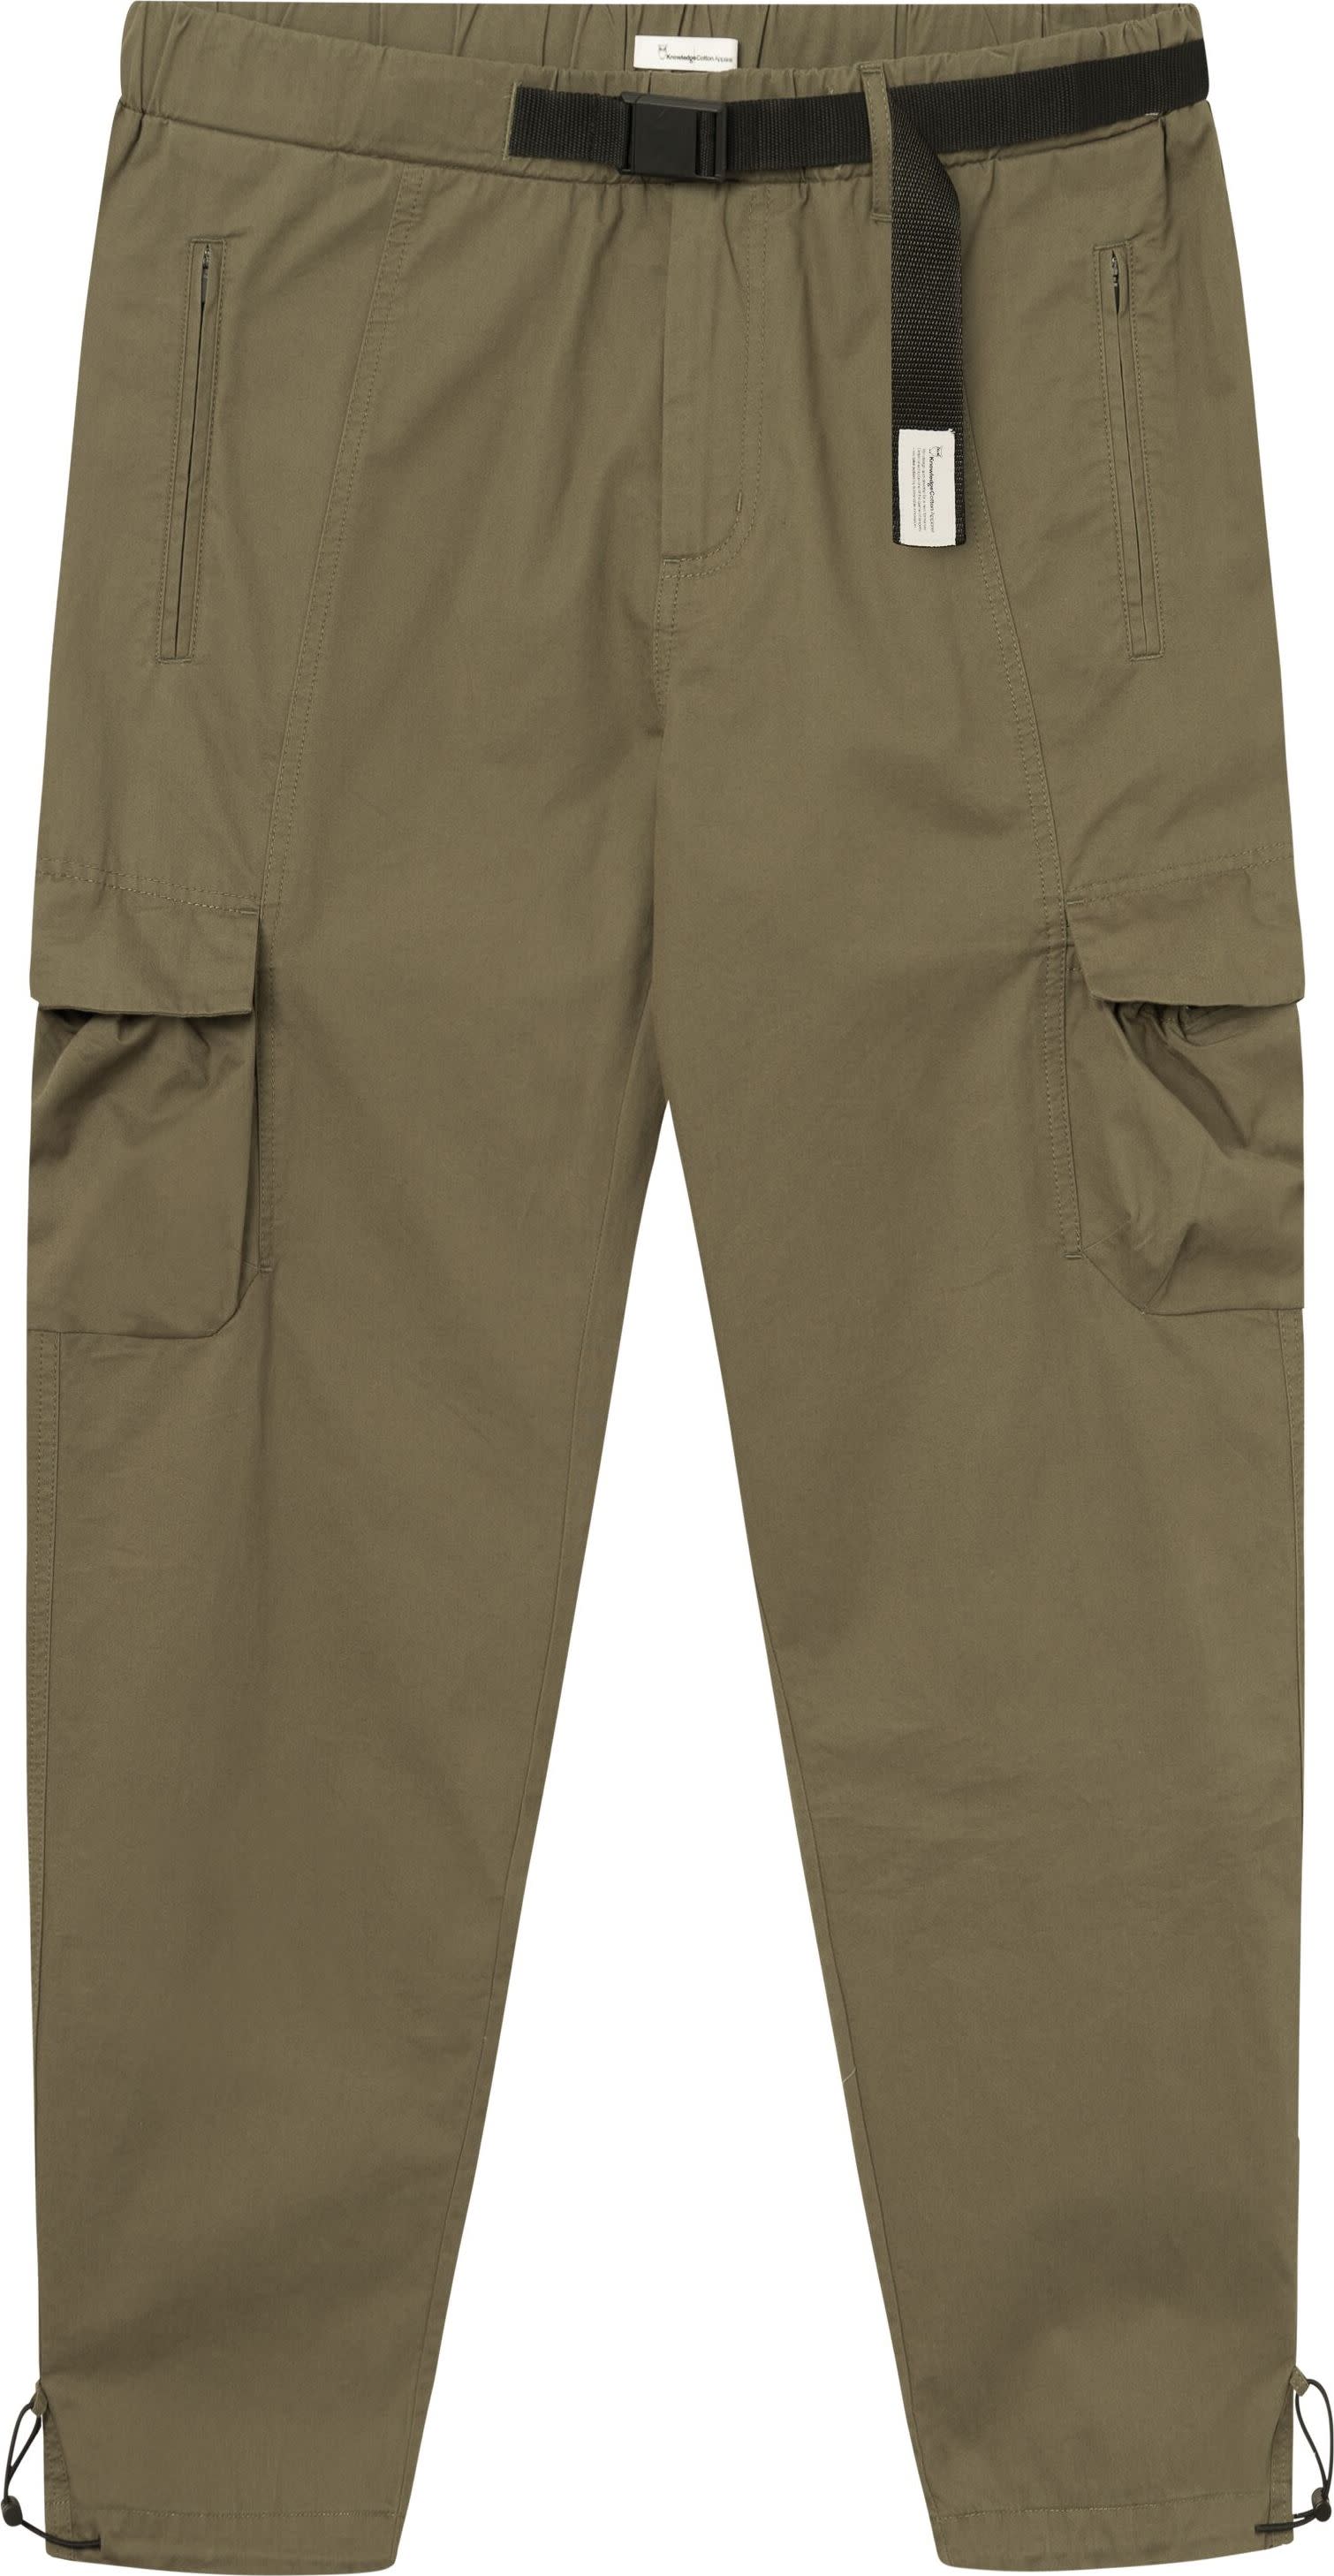 Olive Twill Cargo Pants - Firefly